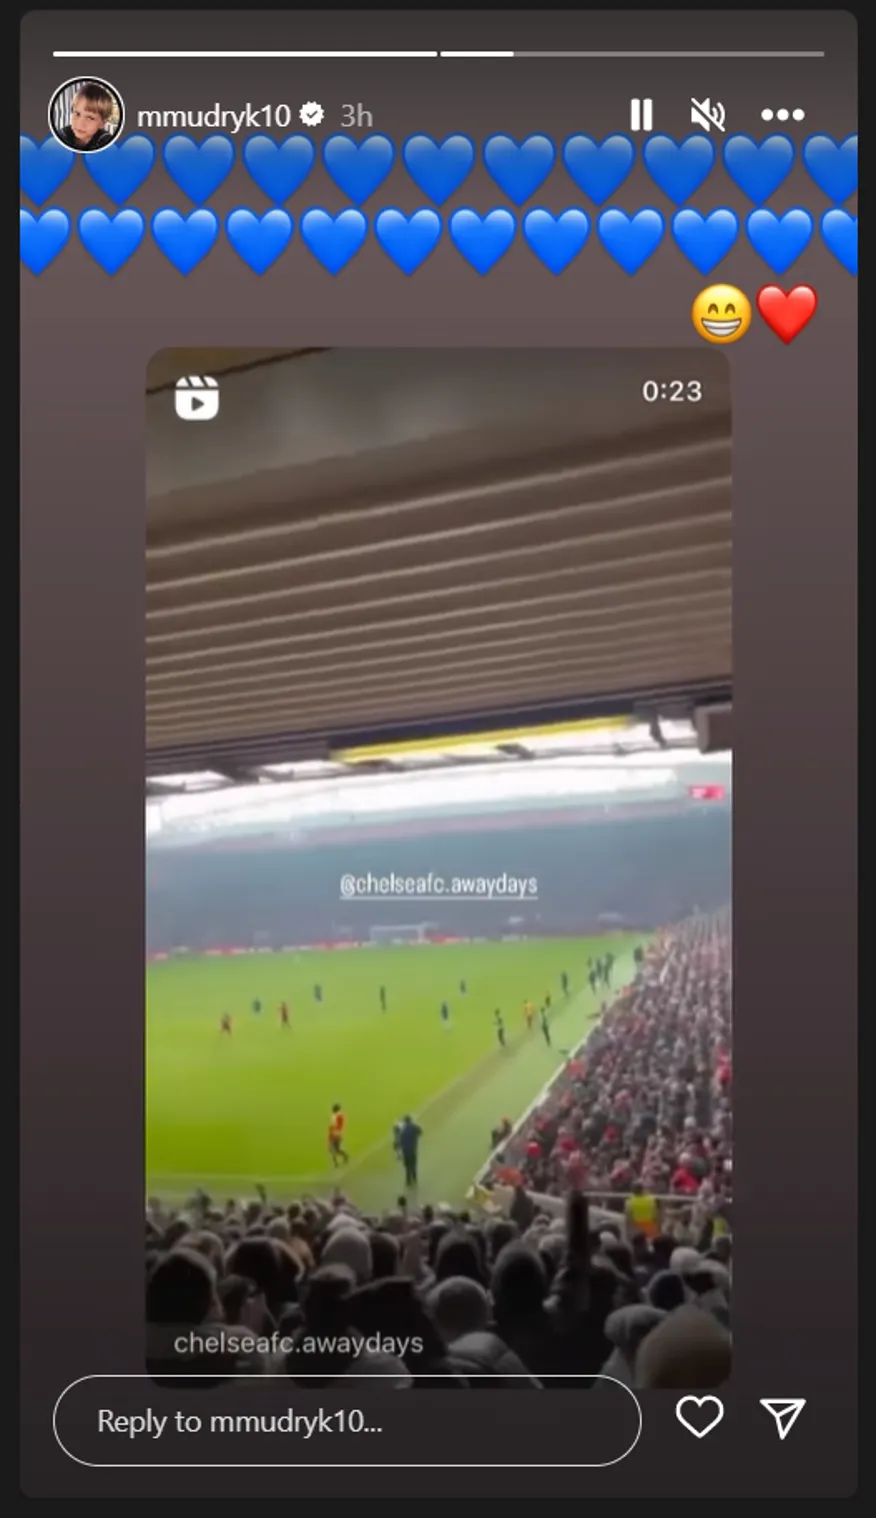 Mudryk re-shares Chelsea chant mocking Arsenal for failing to sign him